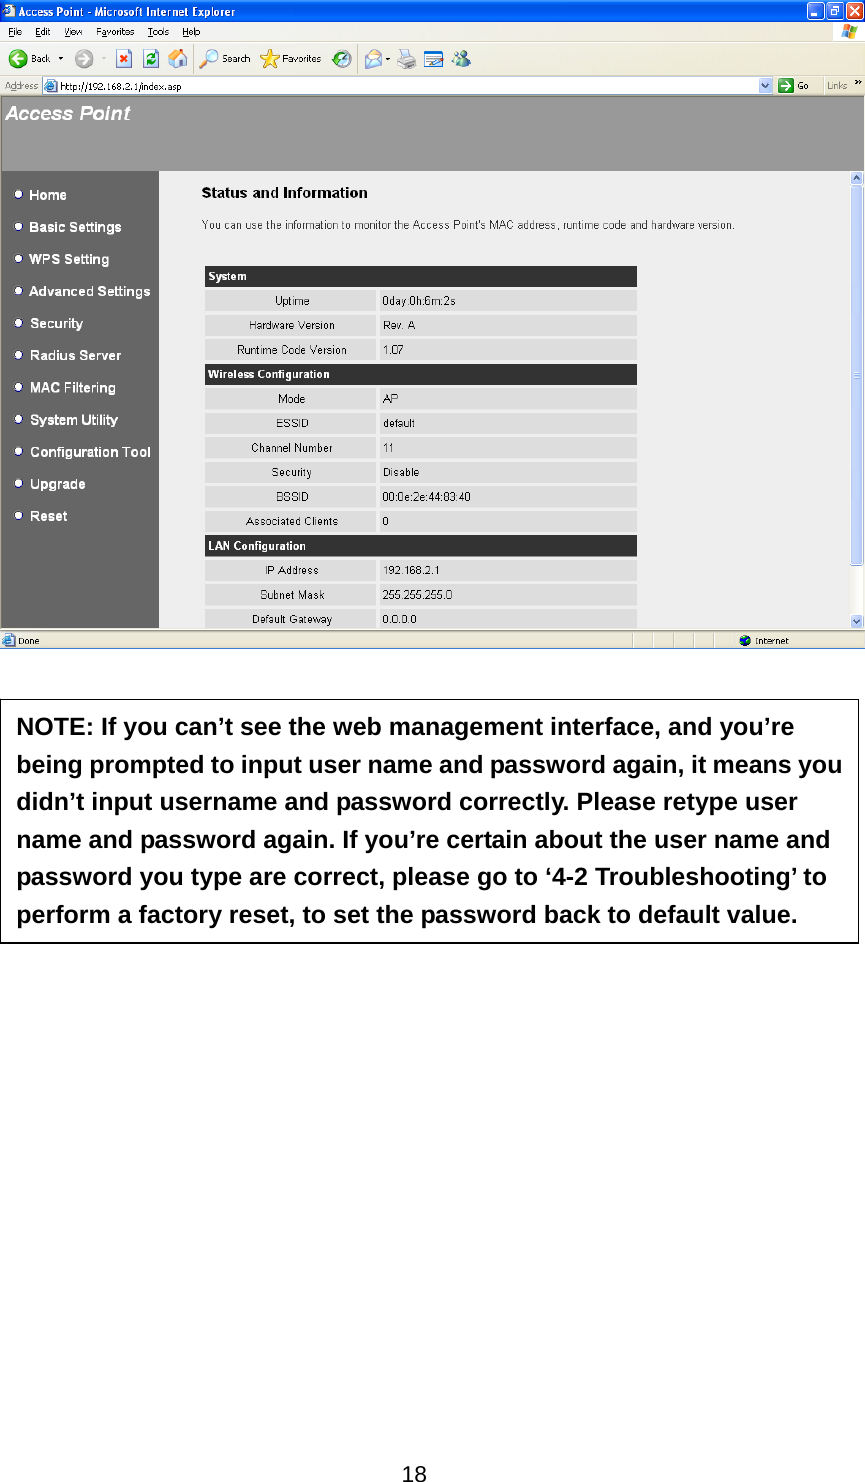  18                 NOTE: If you can’t see the web management interface, and you’re being prompted to input user name and password again, it means you didn’t input username and password correctly. Please retype user name and password again. If you’re certain about the user name and password you type are correct, please go to ‘4-2 Troubleshooting’ to perform a factory reset, to set the password back to default value. 